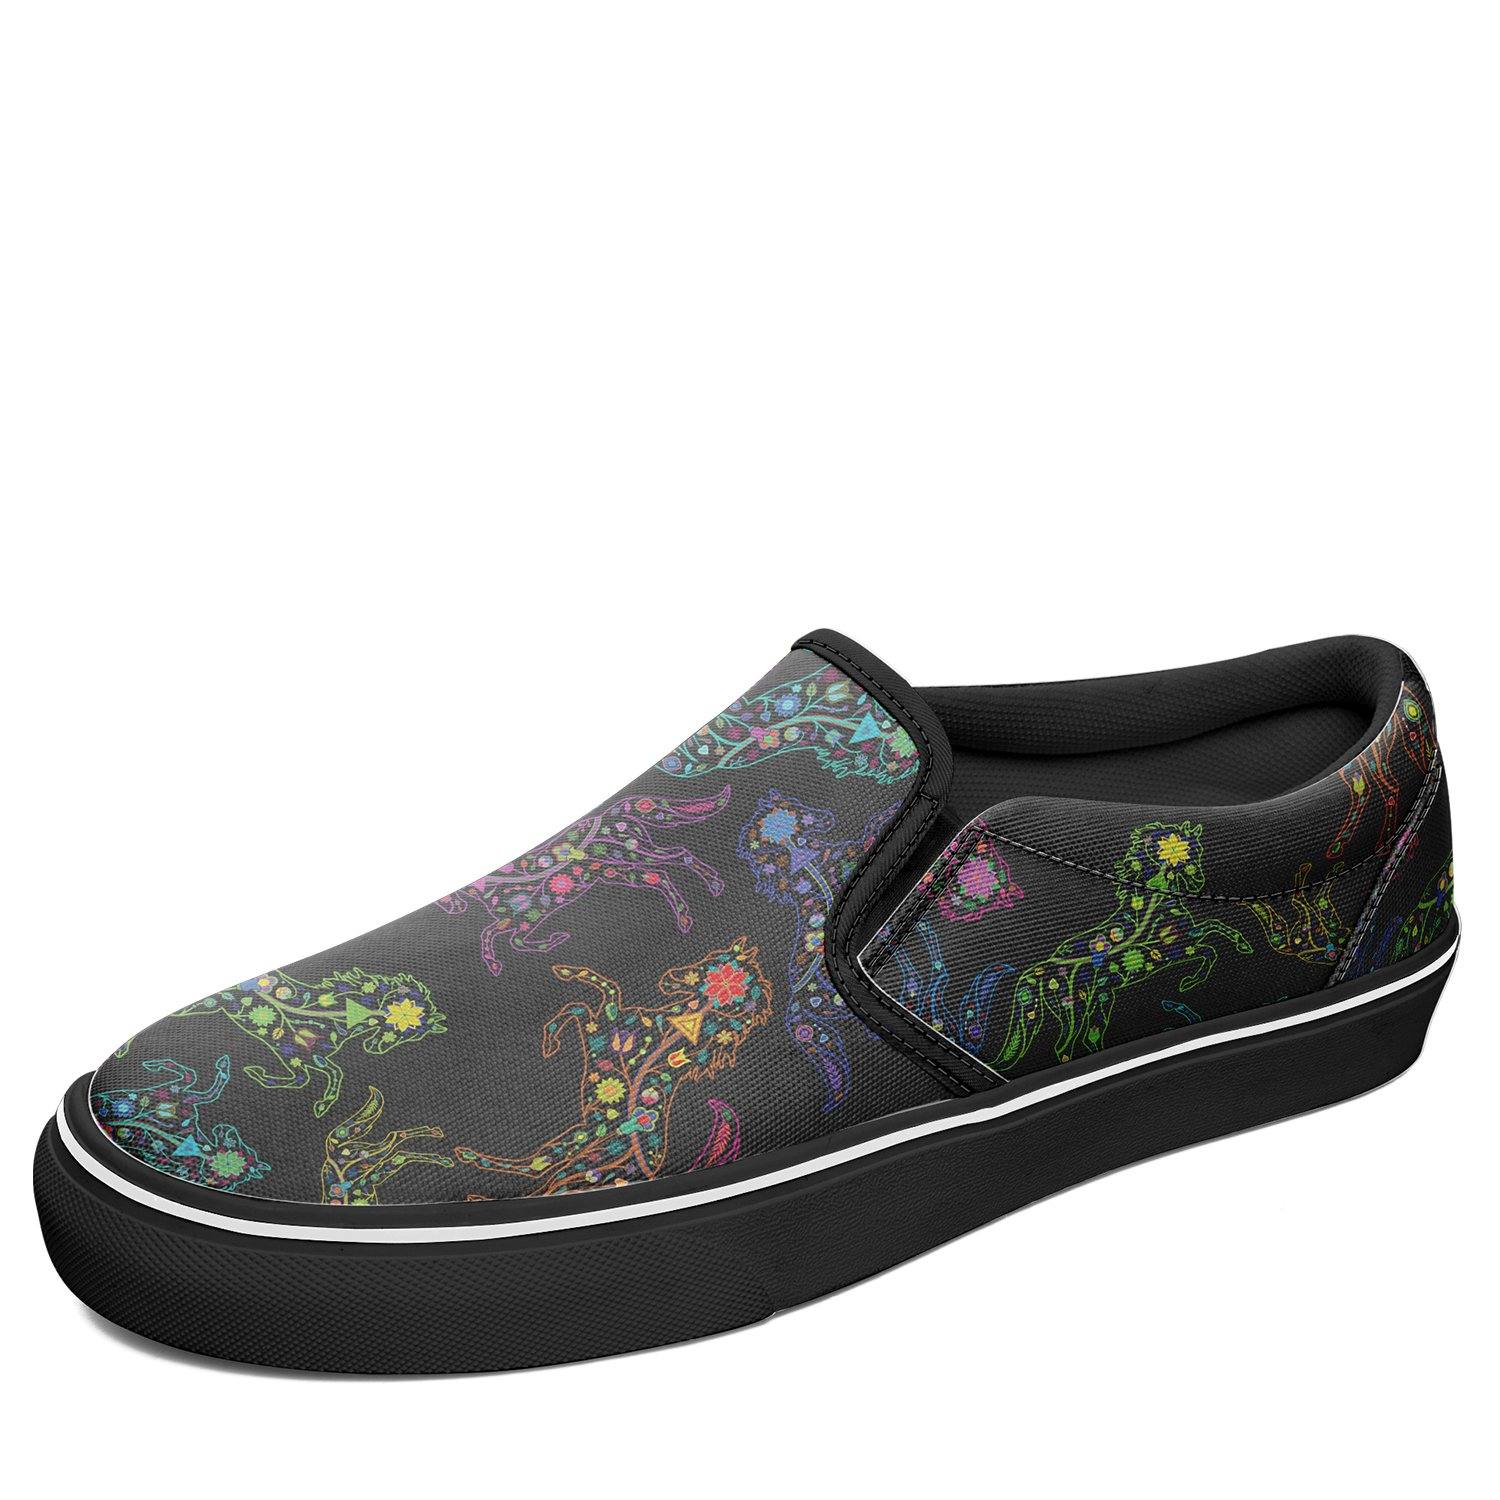 Floral Horse Otoyimm Canvas Slip On Shoes otoyimm Herman US Youth 1 / EUR 32 Black Sole 